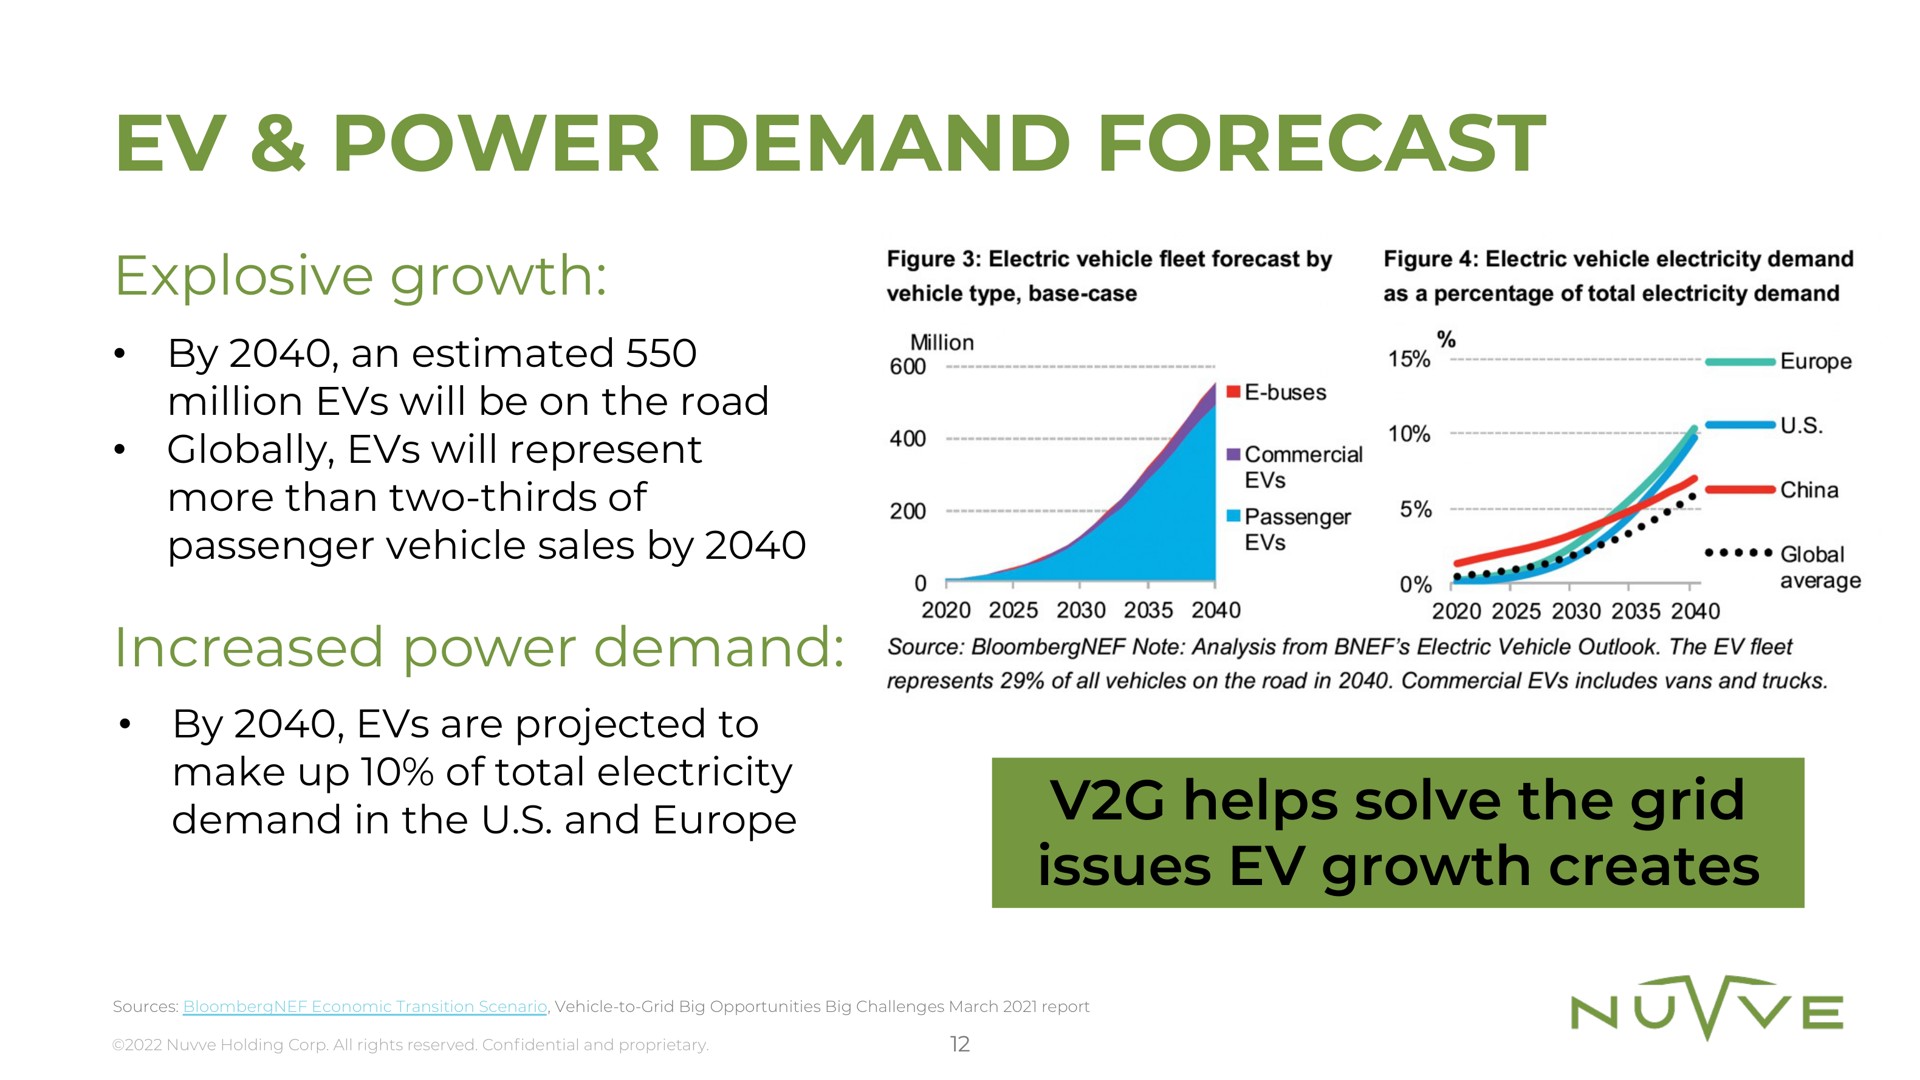 power demand forecast explosive growth increased power demand helps solve the grid issues growth creates | Nuvve